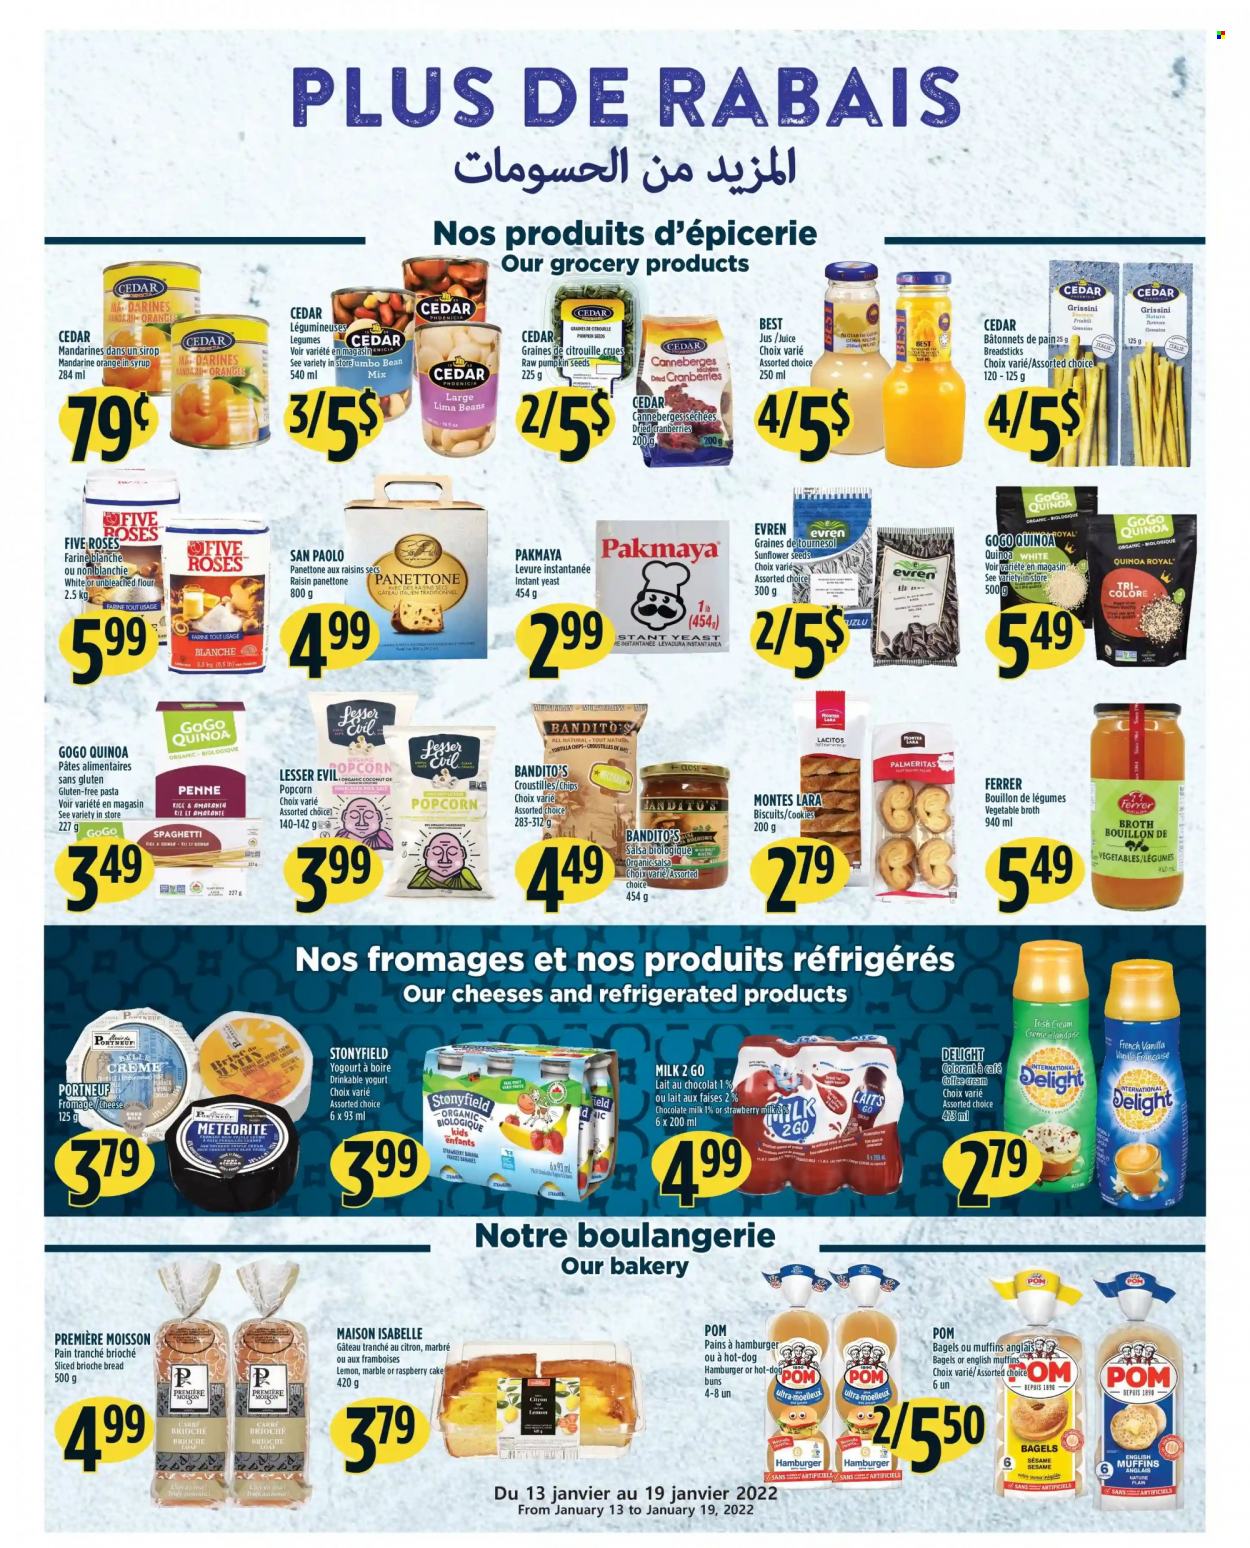 thumbnail - Adonis Flyer - January 13, 2022 - January 19, 2022 - Sales products - bagels, bread, english muffins, cake, buns, brioche, panettone, mandarines, spaghetti, hamburger, pasta, cheese, yoghurt, milk, yeast, lima beans, cookies, milk chocolate, chocolate, biscuit, bread sticks, tortilla chips, popcorn, grissini, bouillon, broth, cranberries, rice, penne, salsa, dried fruit, sunflower seeds, pumpkin seeds, juice, coffee, Rin, PREMIERE, quinoa, raisins, chips, oranges. Page 7.